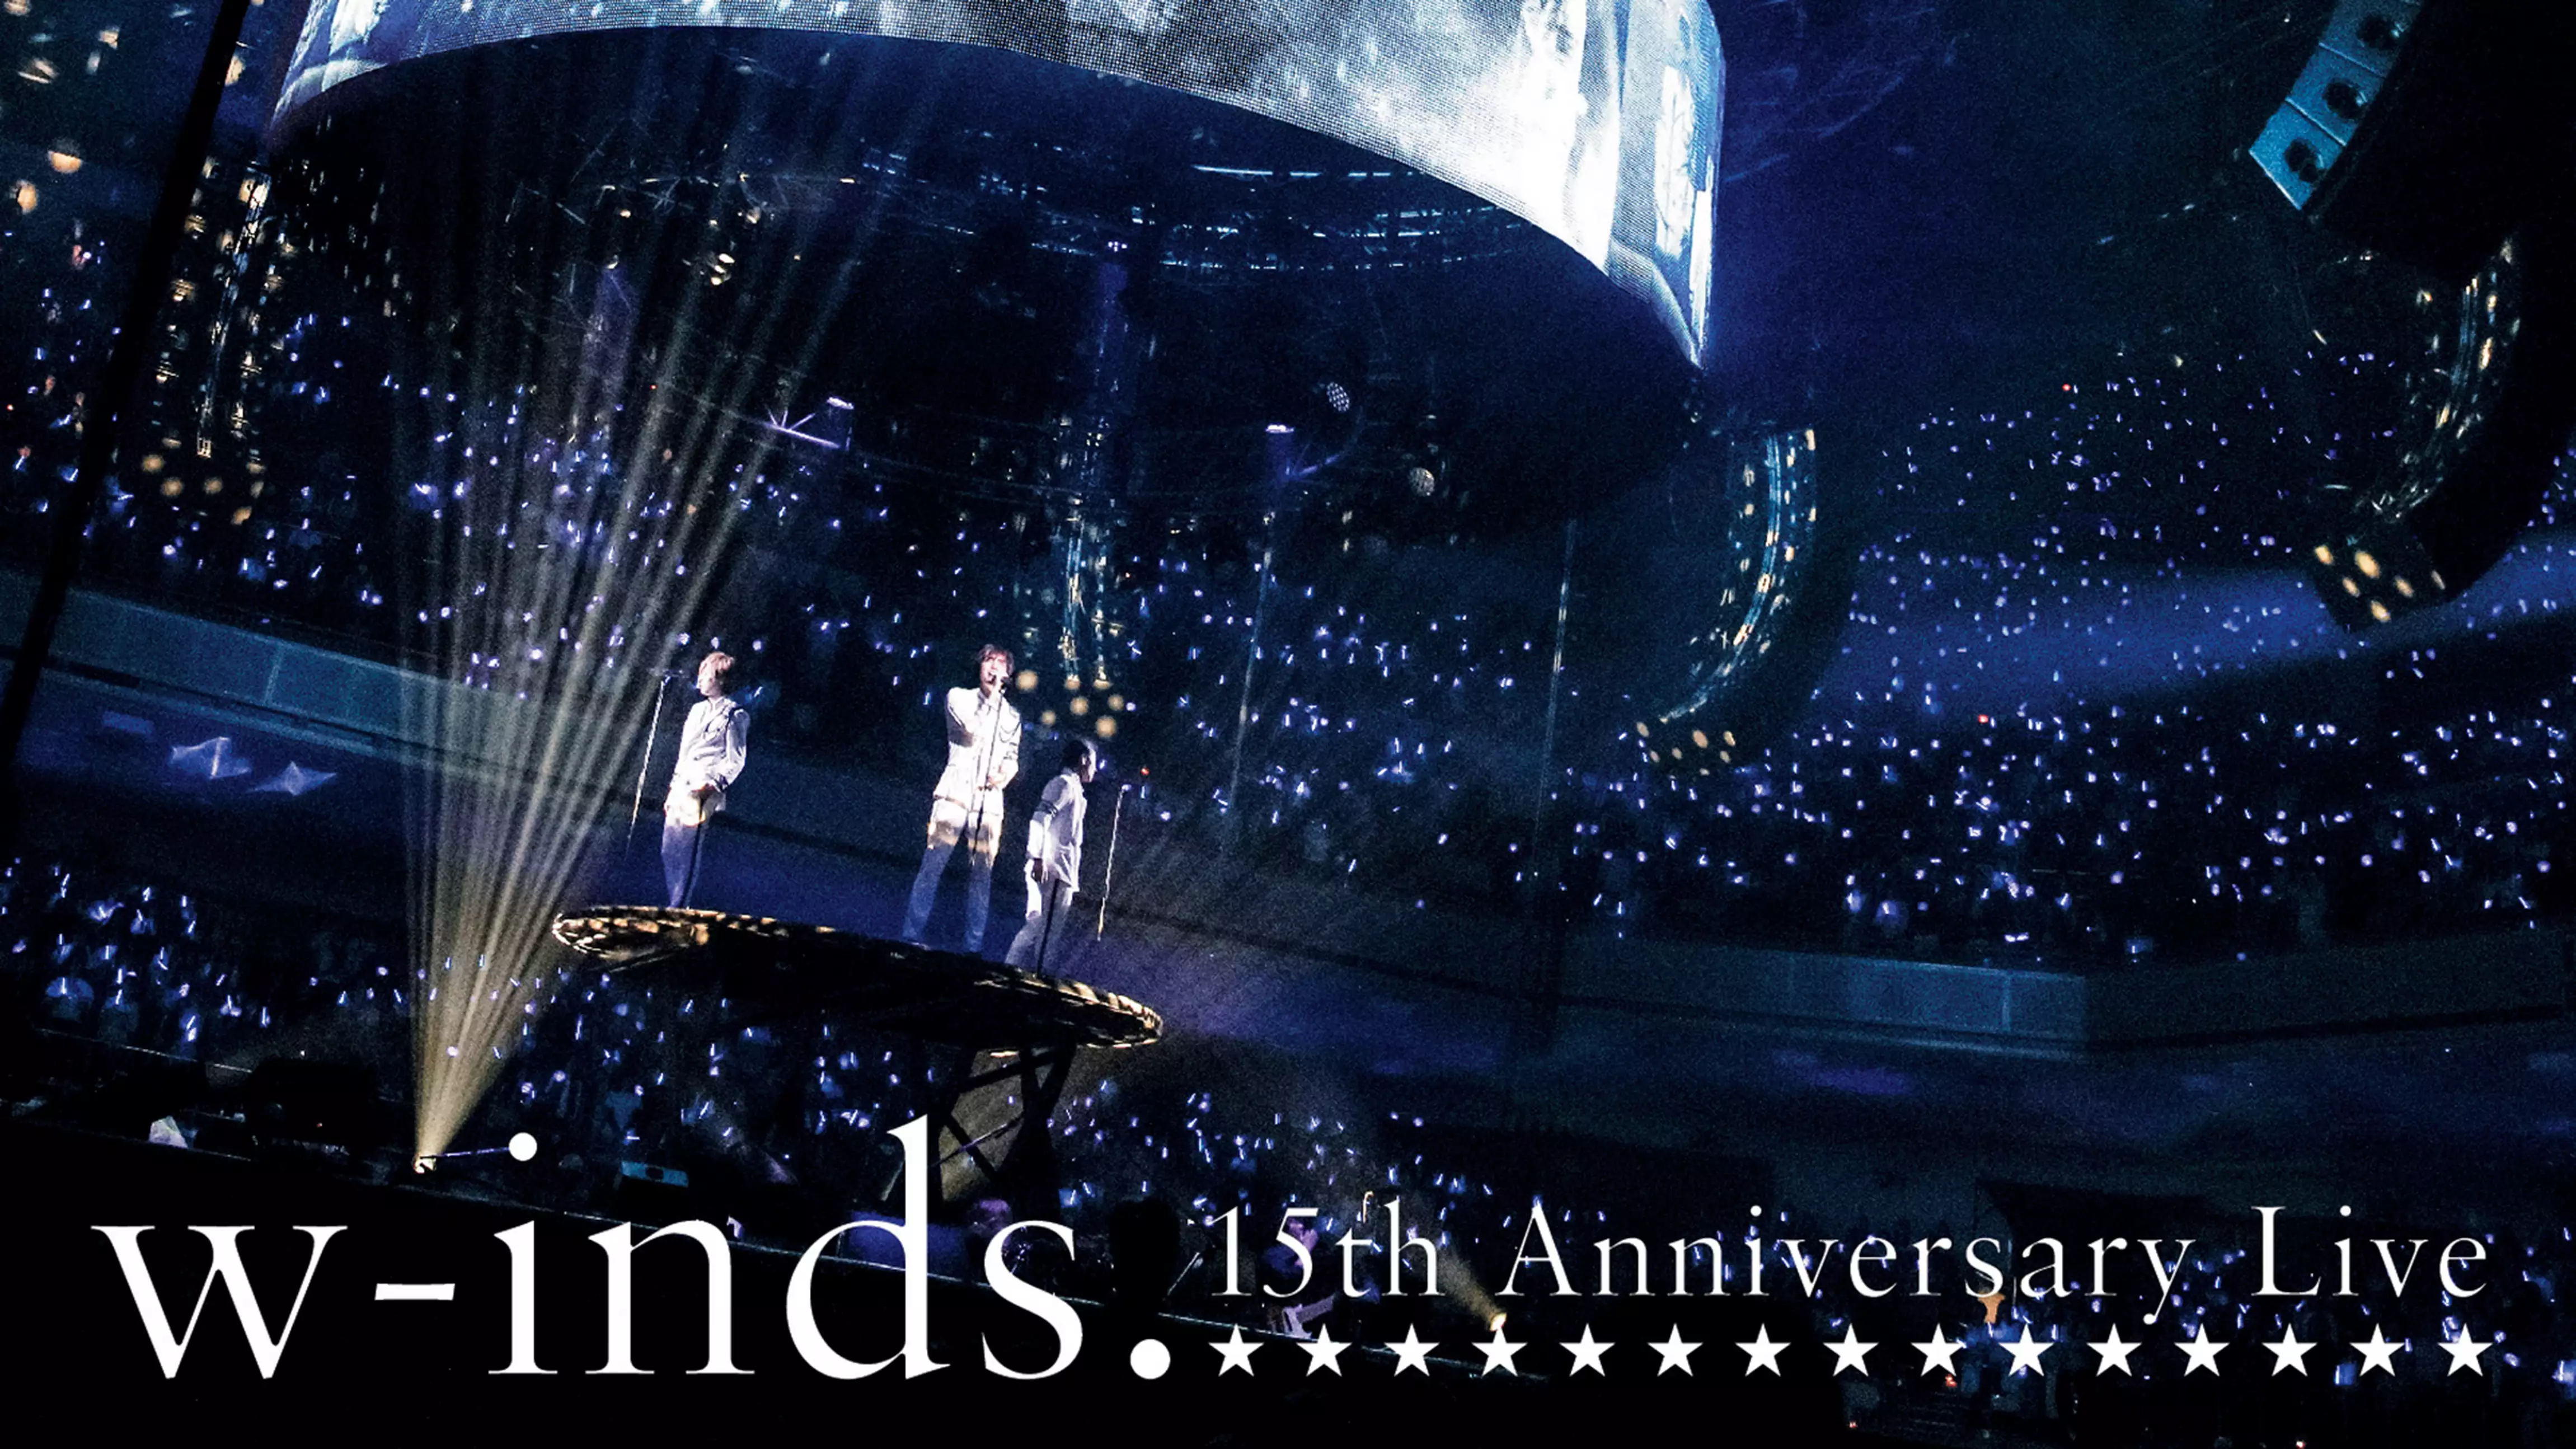 w-inds.15th Anniversary Live